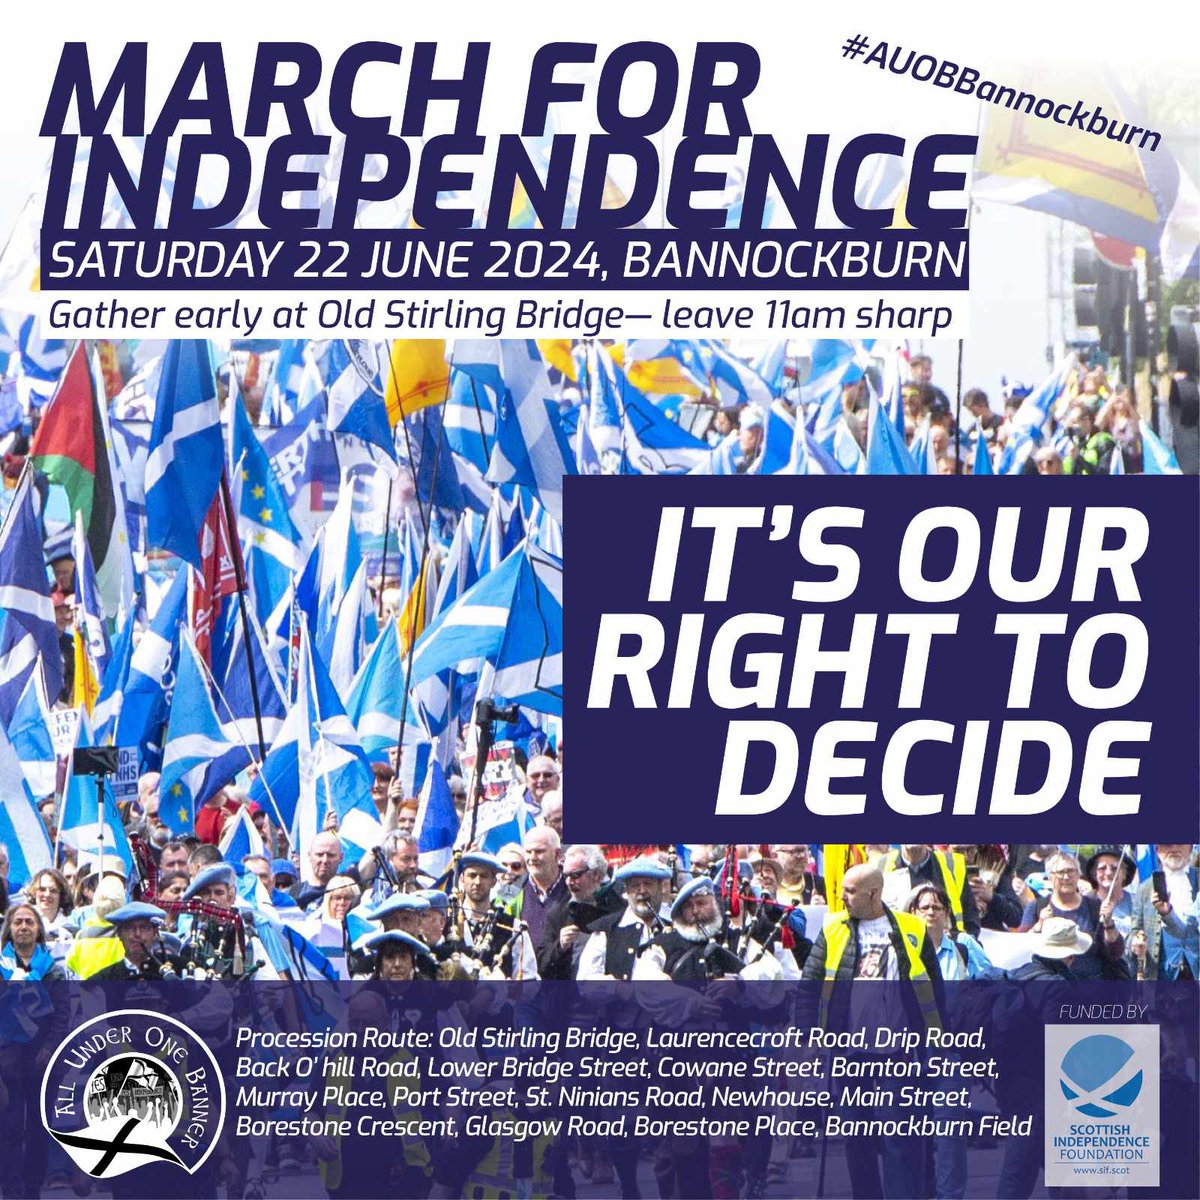 Now is the Time to generate and vitalise the independence movement. We look forward to seeing everyone at this year's annual Bannockburn march, which takes place Saturday 22 June. Make sure to attend the National demonstration for self determination. Be there! 🏴󠁧󠁢󠁳󠁣󠁴󠁿 #AUOBBannockburn